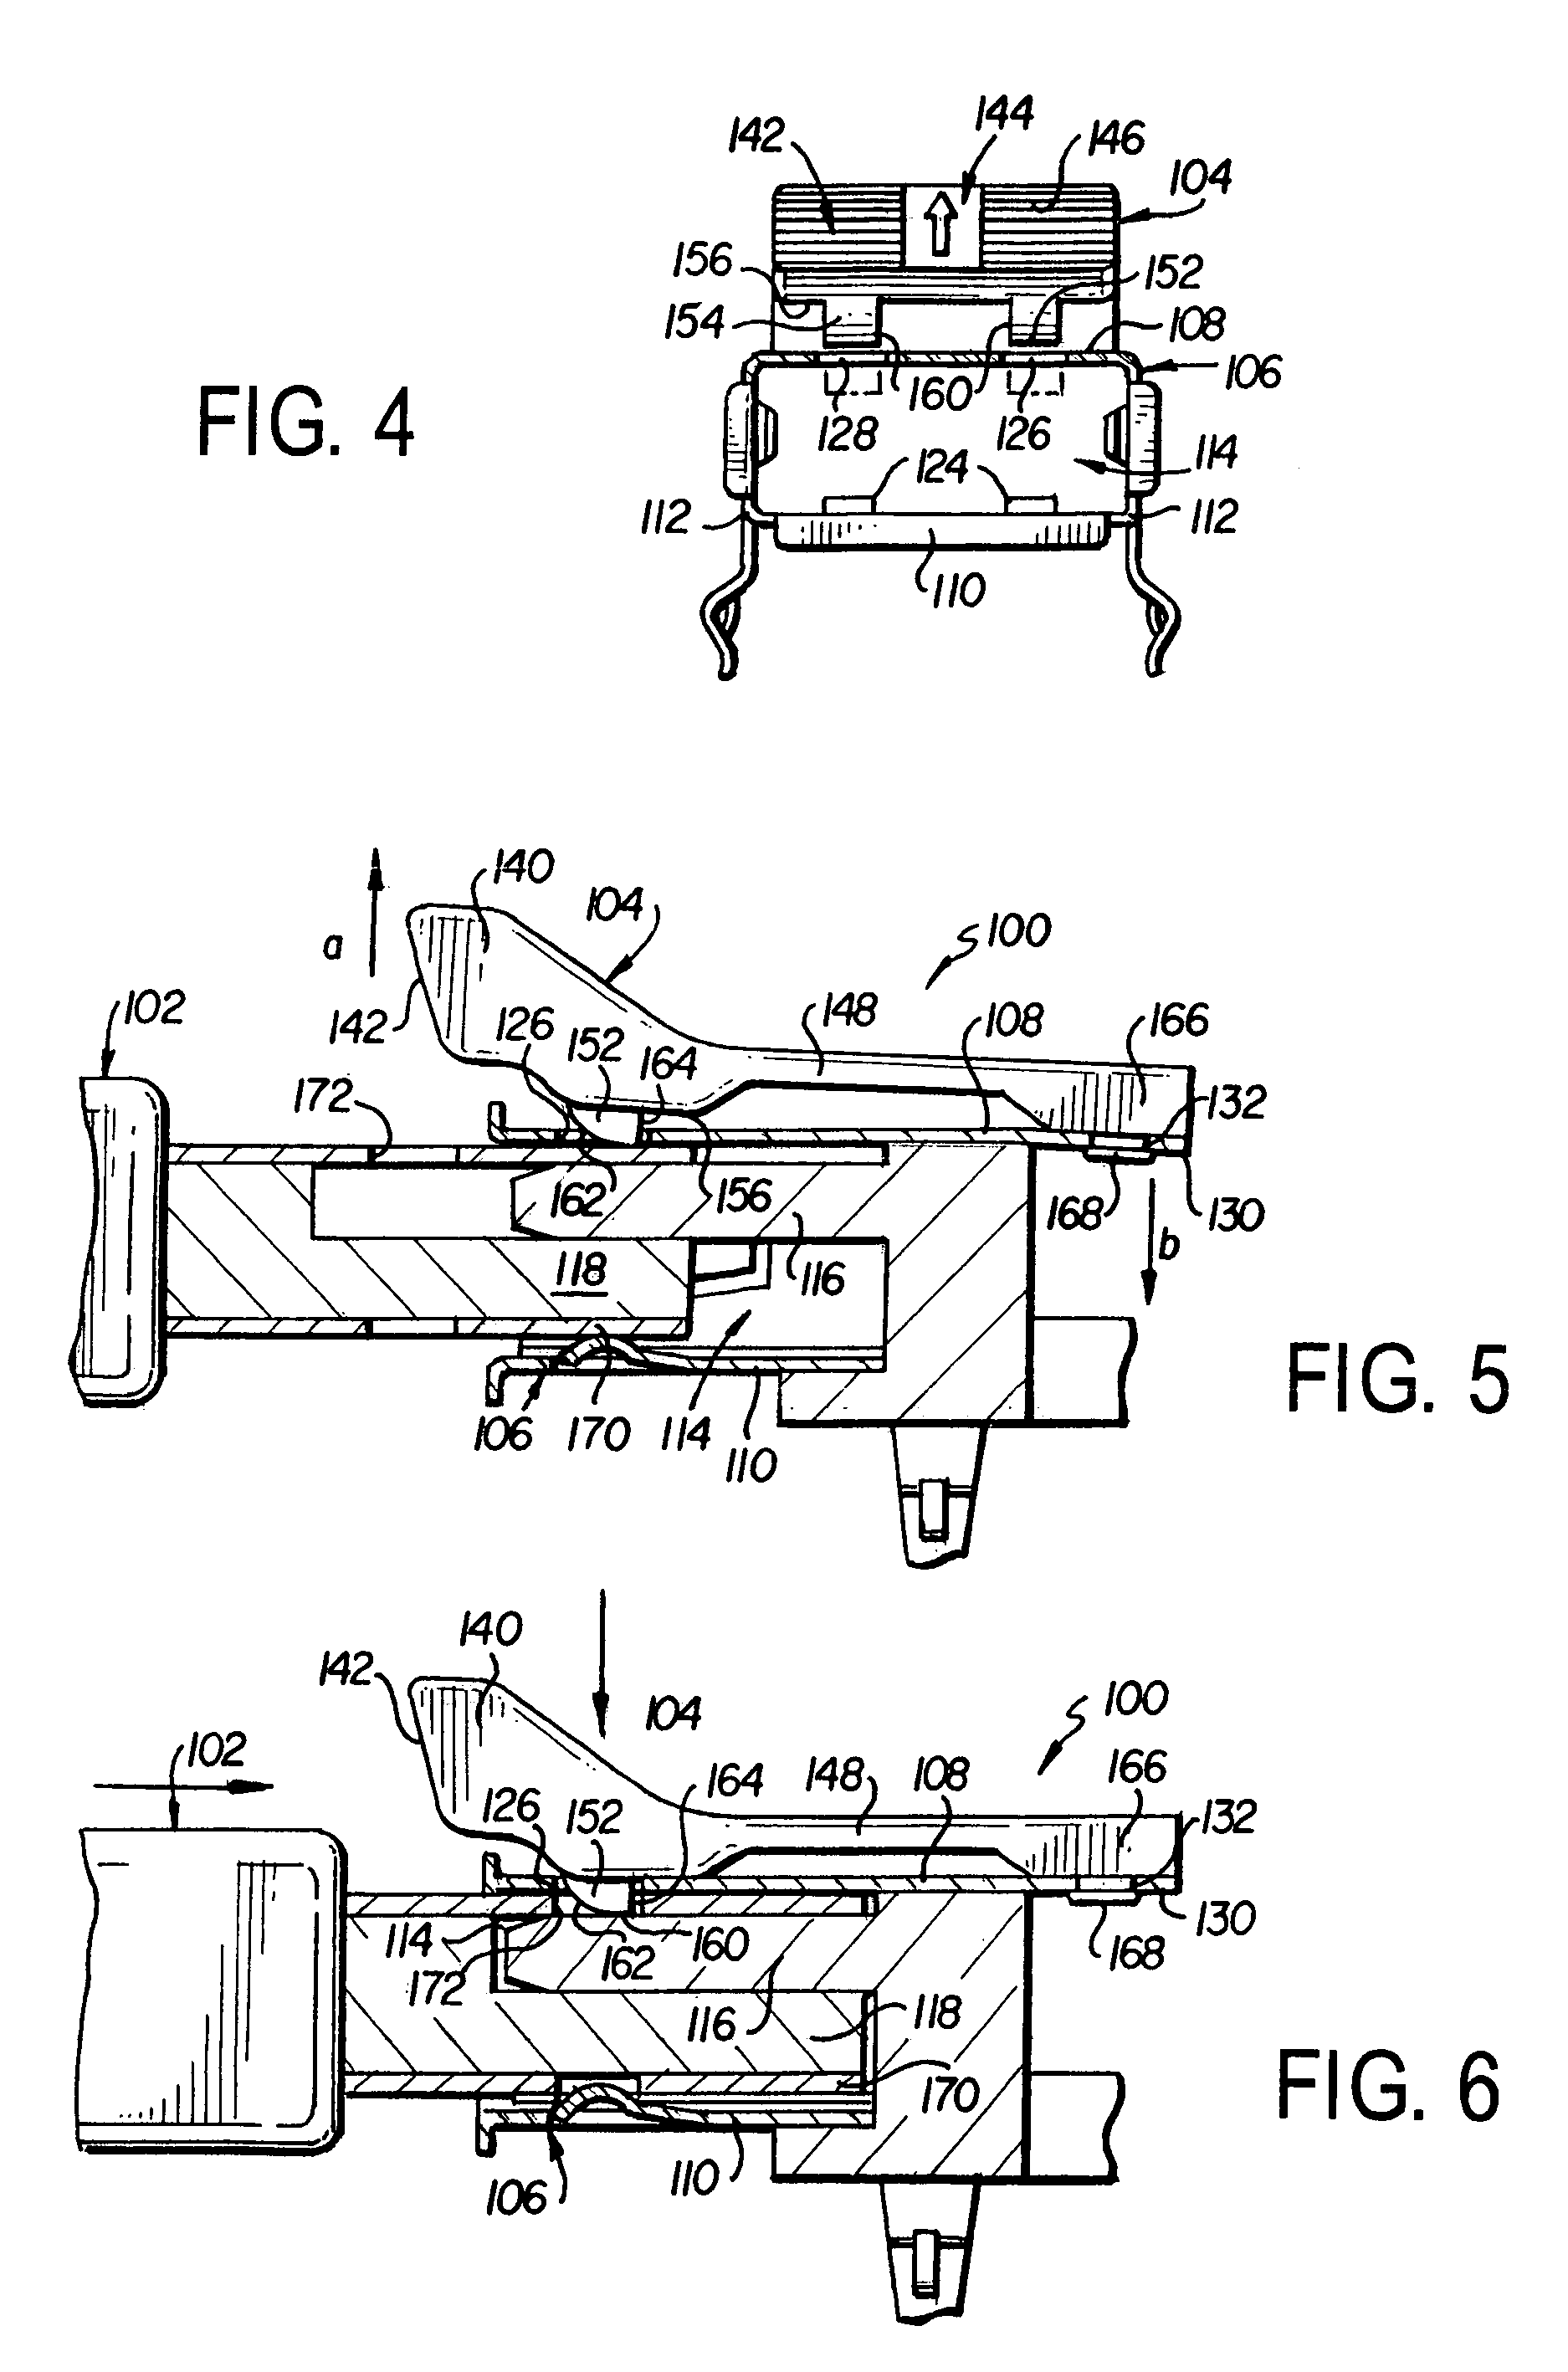 Electrical connector with positive lock